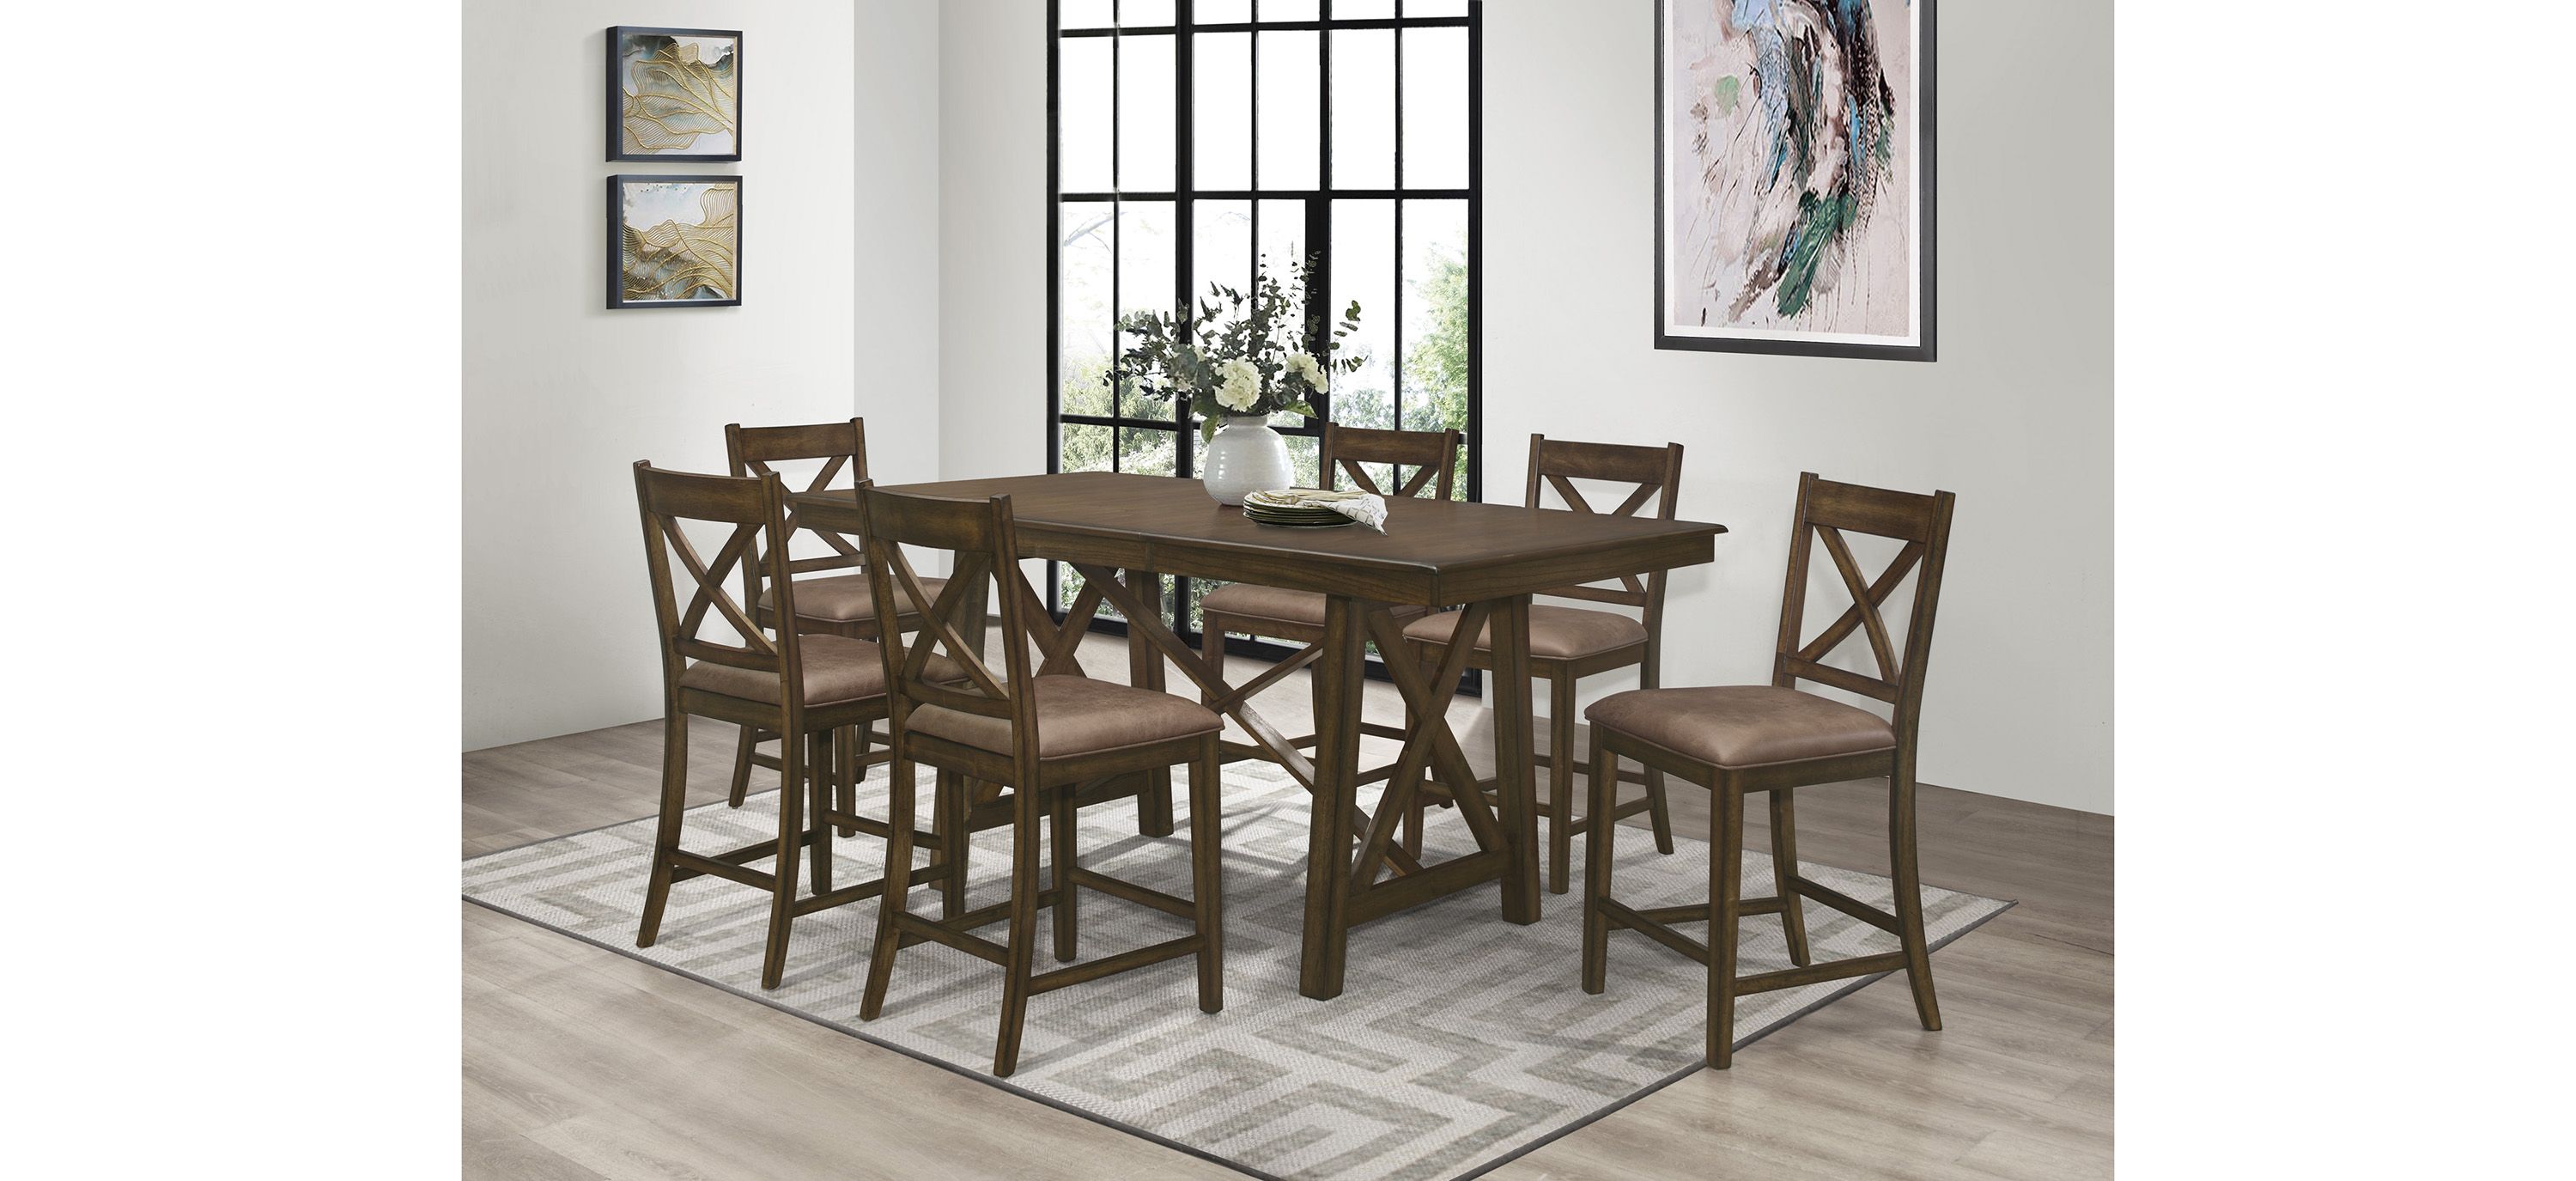 Weston 7-pc. Counter Height Dining Room Set